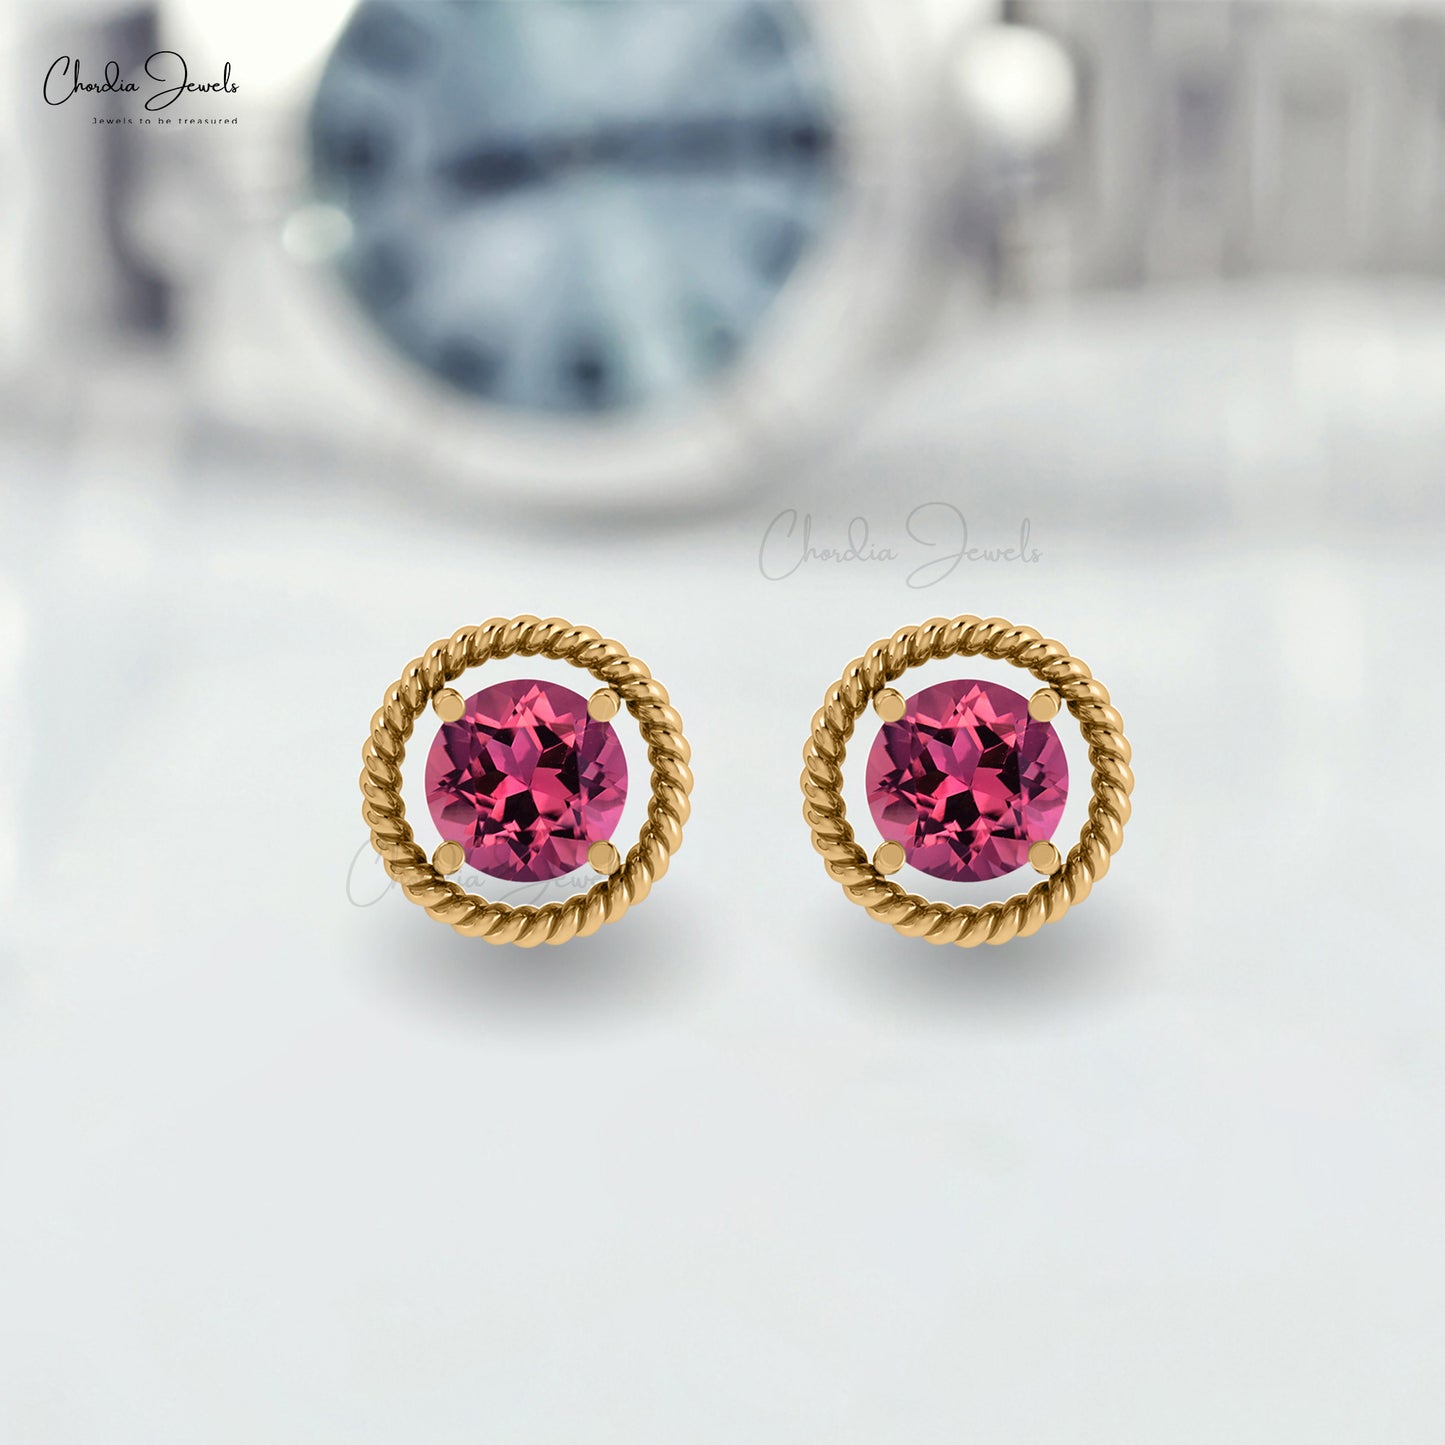 Brilliant Round Cut 5mm Natural Pink Tourmaline Spiral Studs Earring 14k Solid Gold Earrings For Birthday Gift